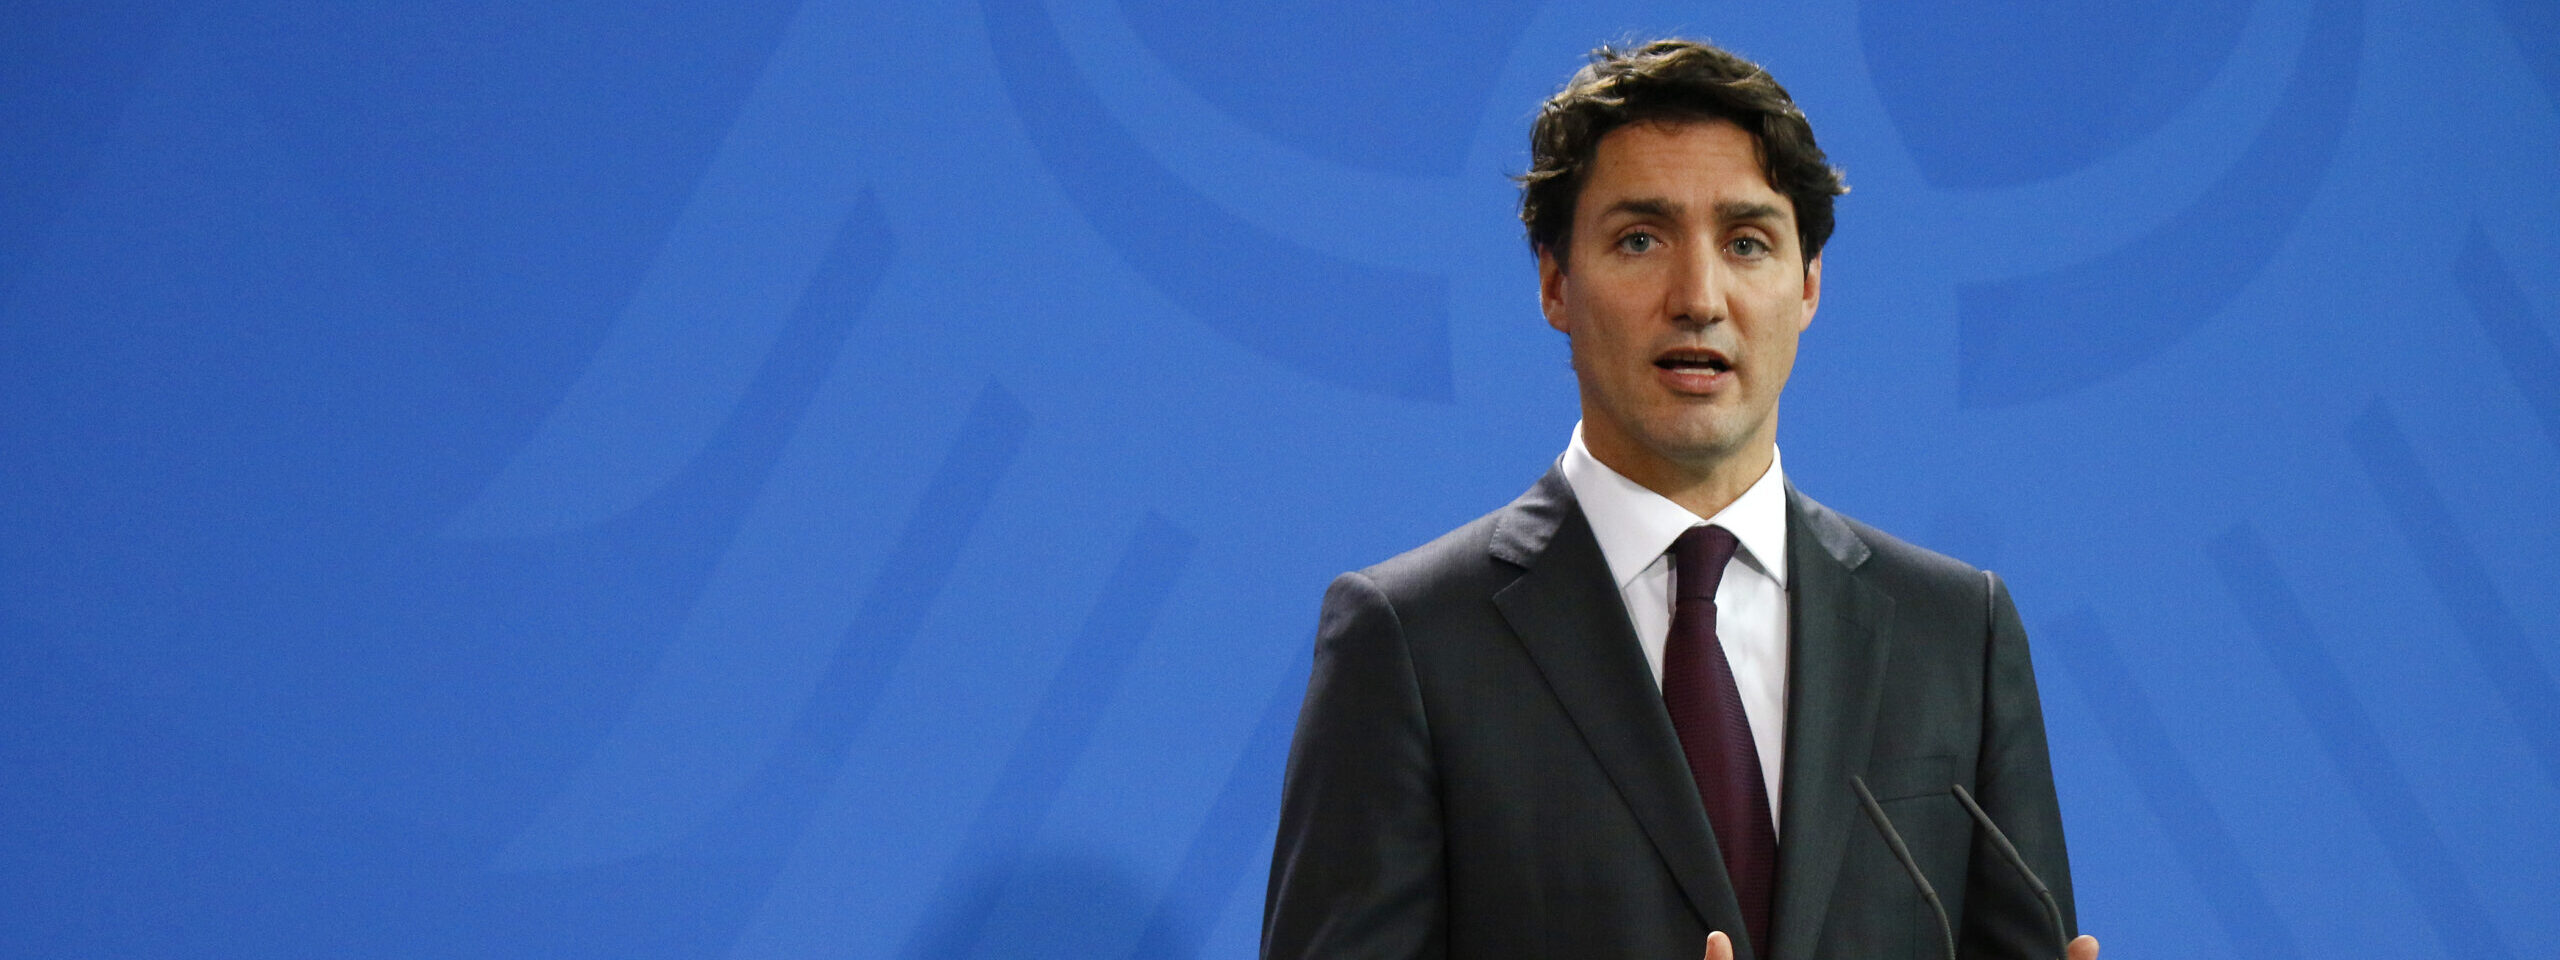 Canada to advocate for return of deported children at Peace Summit